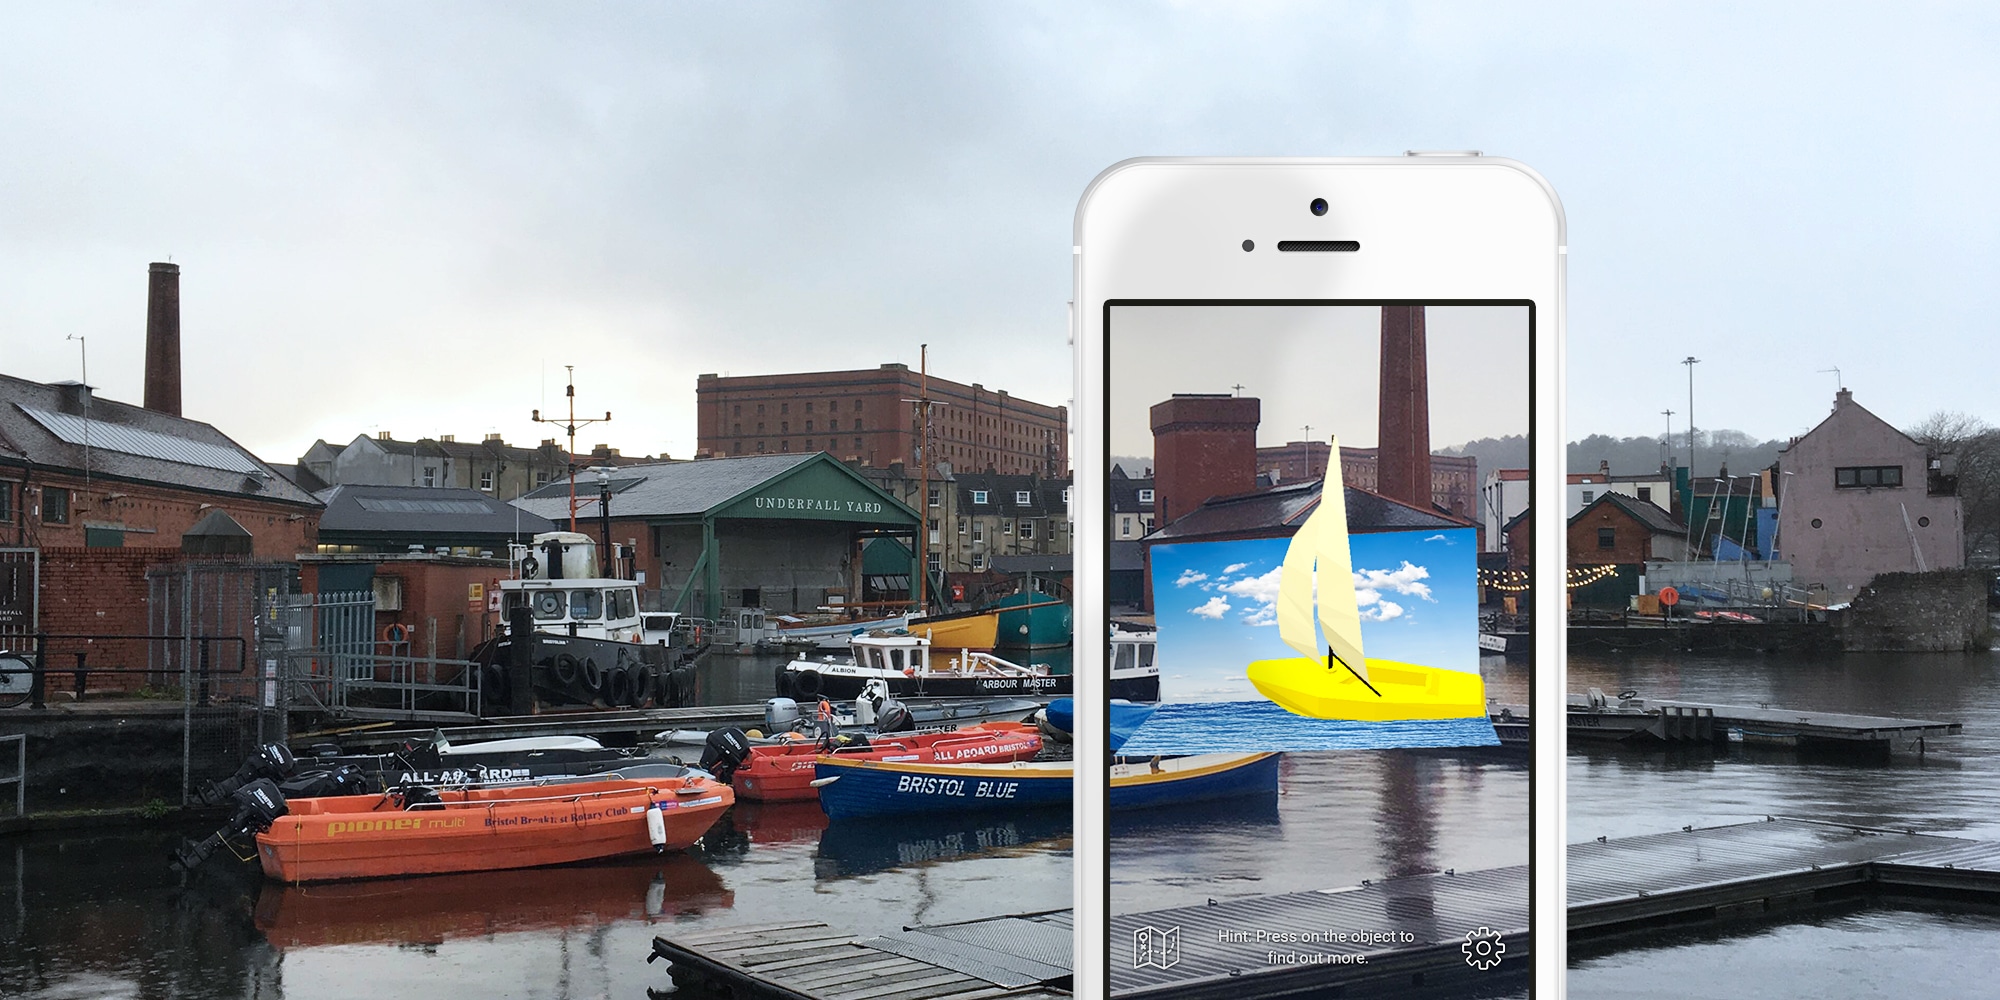 Underfall Boatyard with mobile phone in the foreground augmenting a 3D cartoon ship.